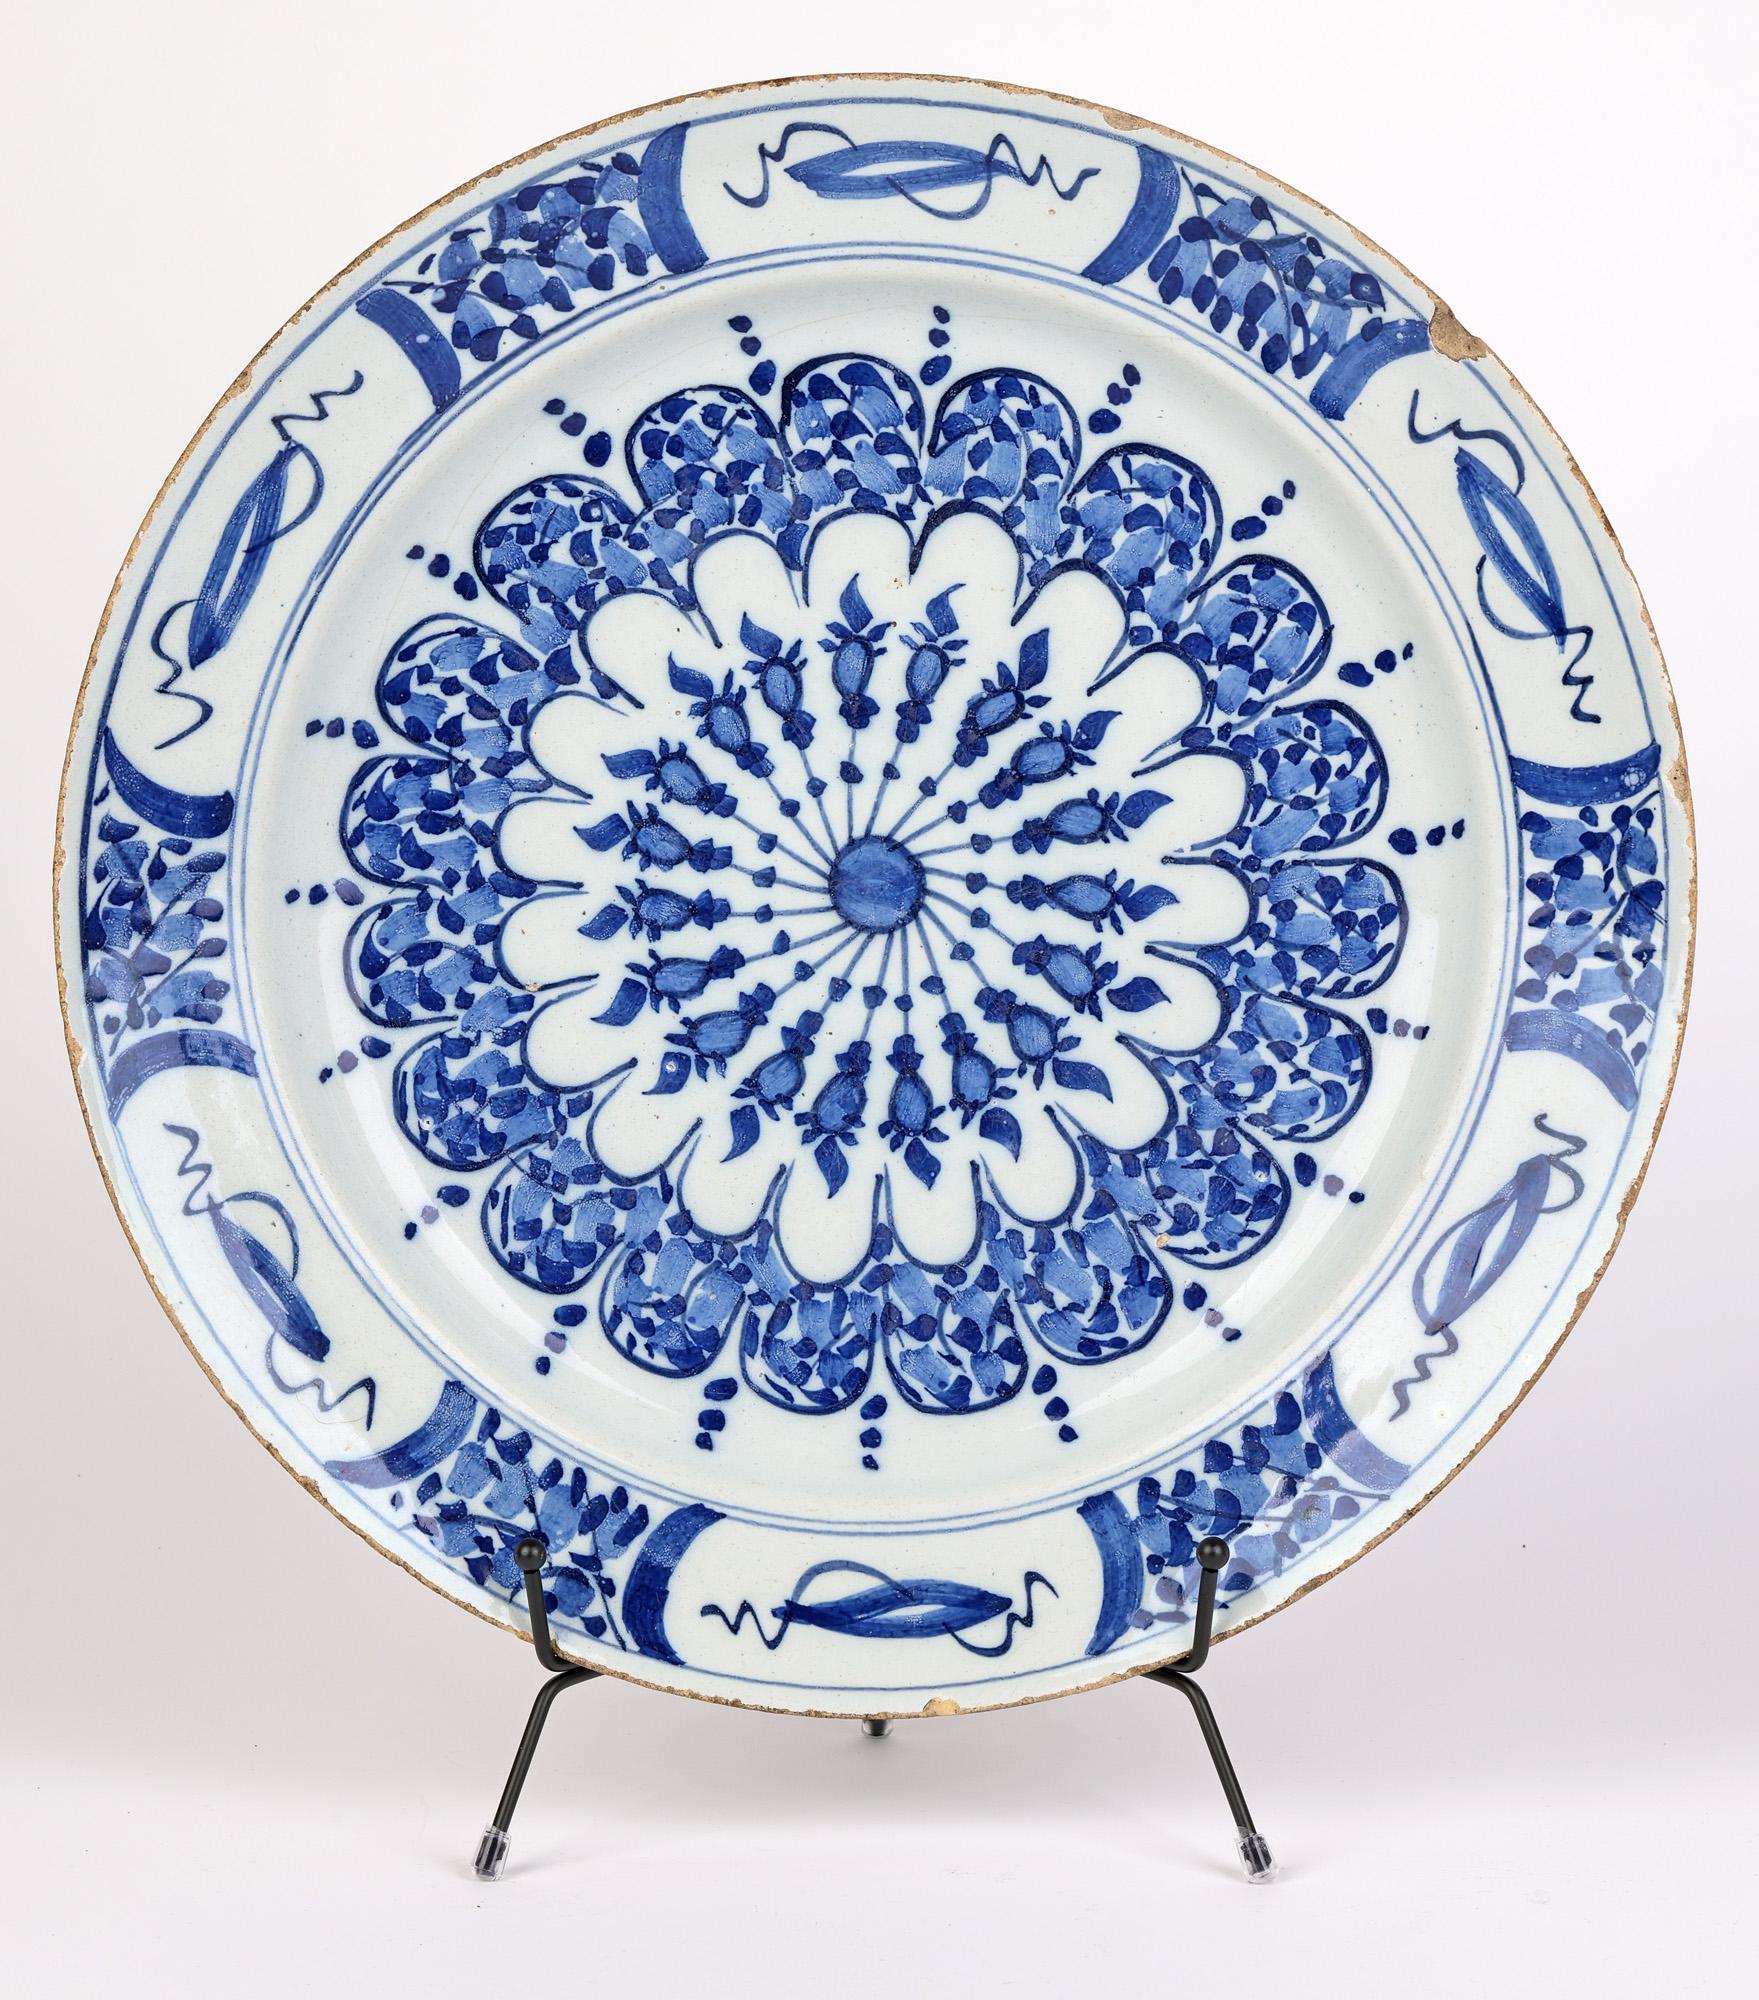 Dutch Delft Tin Glazed Blue & White Art Pottery Wall Plates In Good Condition For Sale In Bishop's Stortford, Hertfordshire